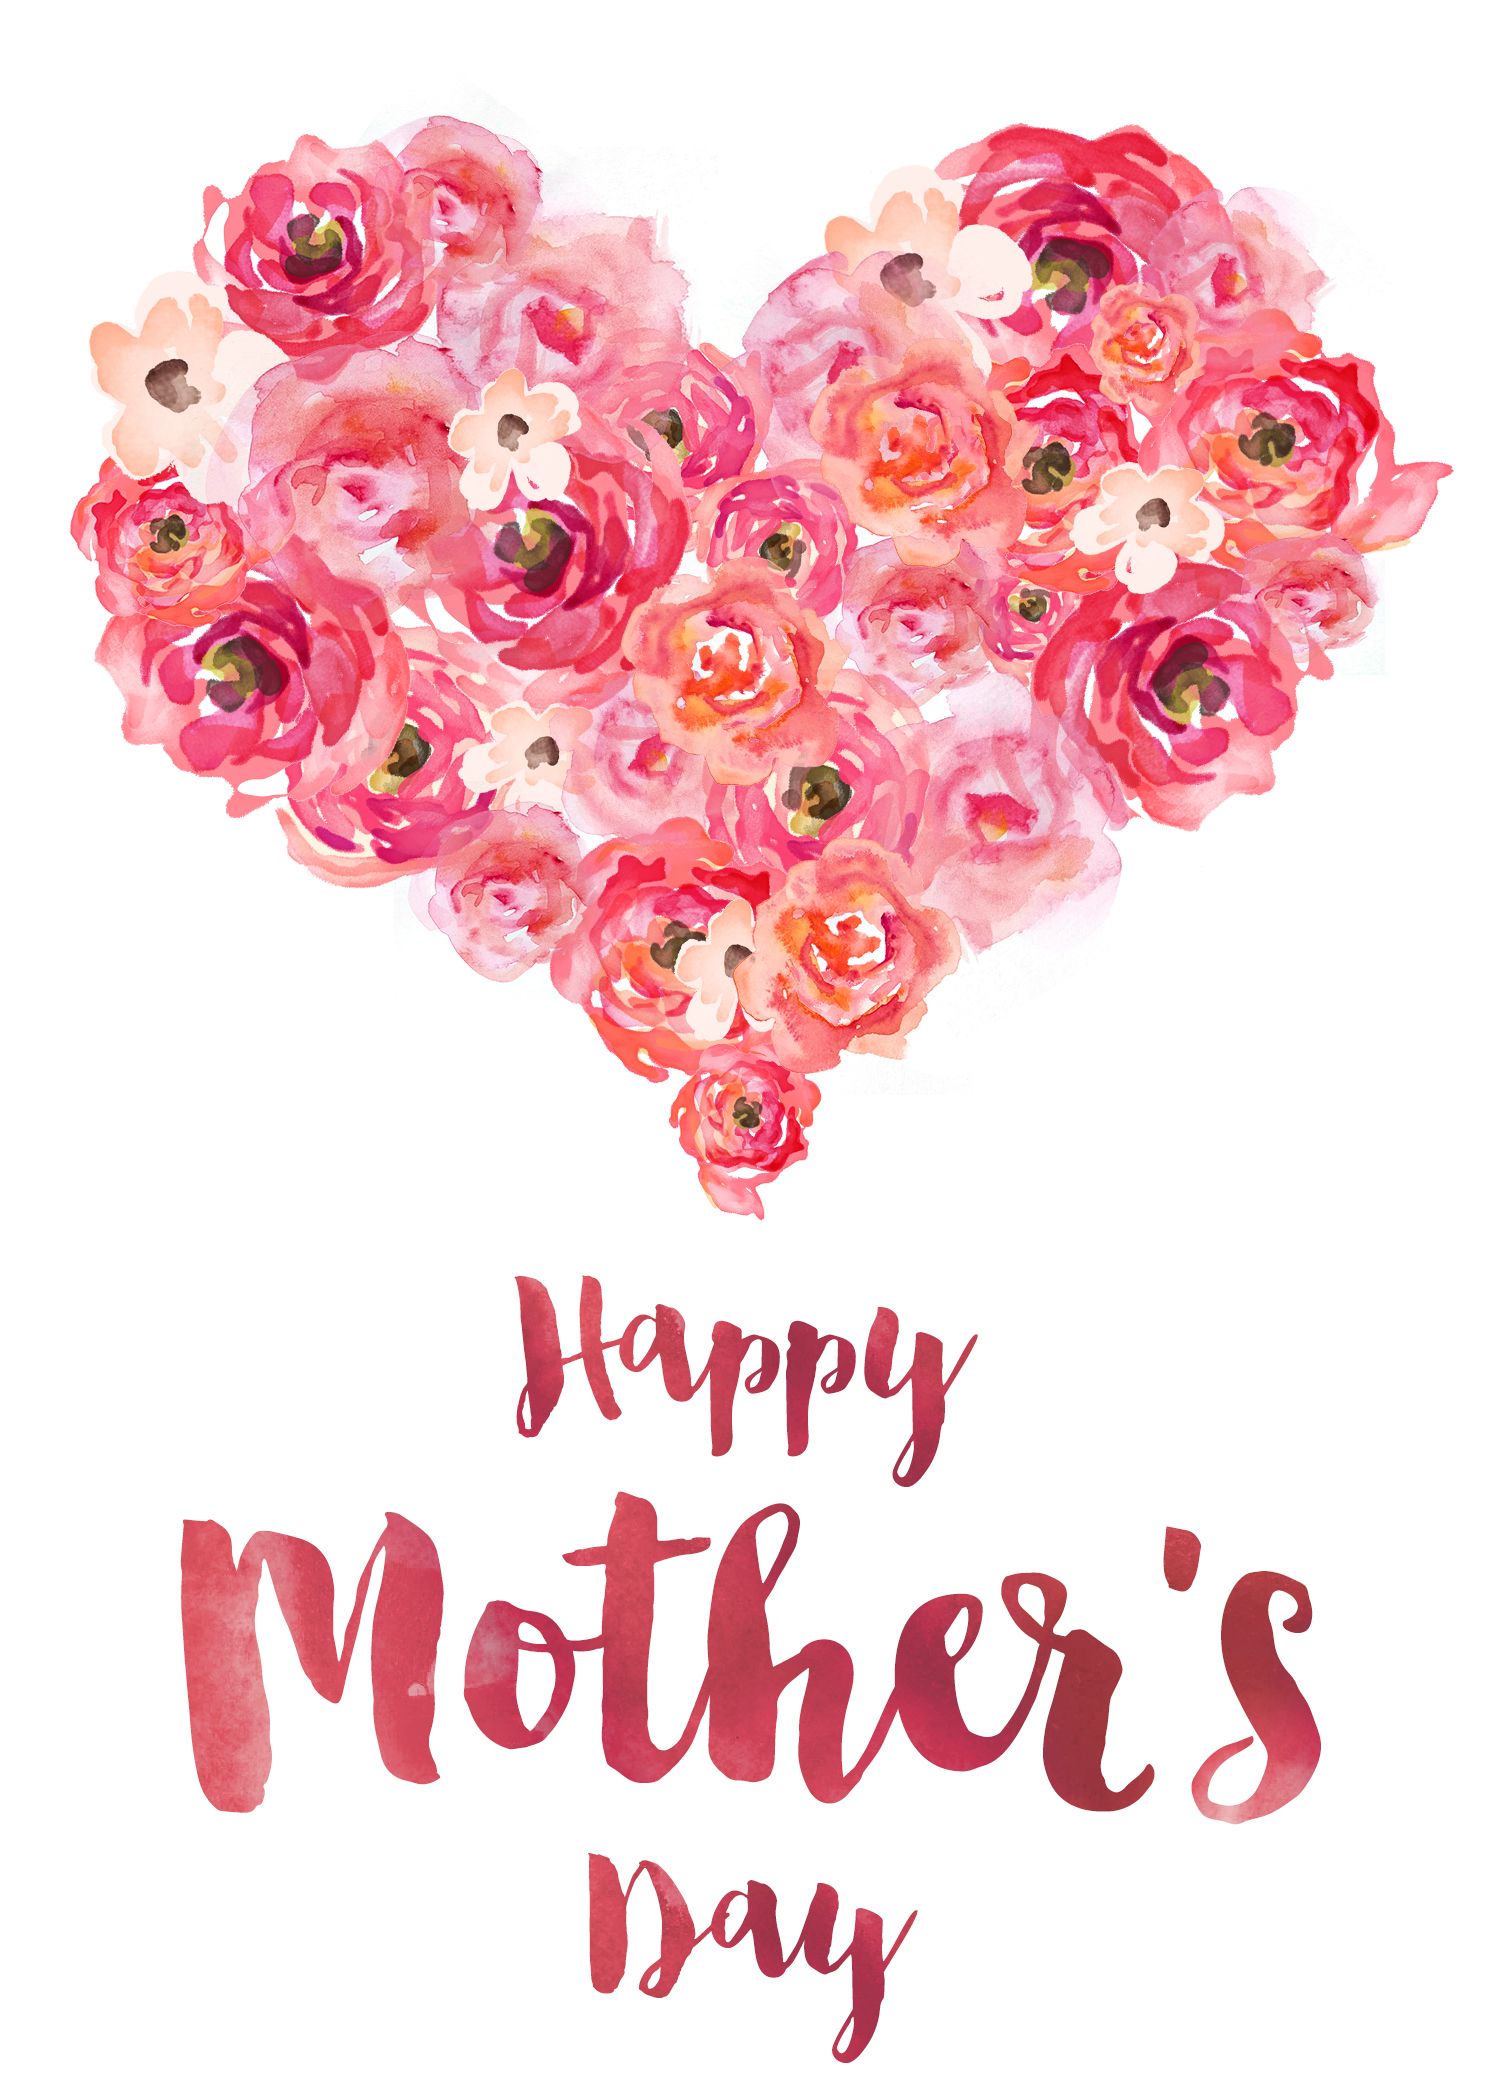 Happy Mother's Day 2020 Images, HD Pictures, Ultra-HD Wallpapers, 4K  Photos, And 3D Photographs For WhatsApp, Instagram, iMessage, Messenger,  Facebook, Twitter, And Social Media